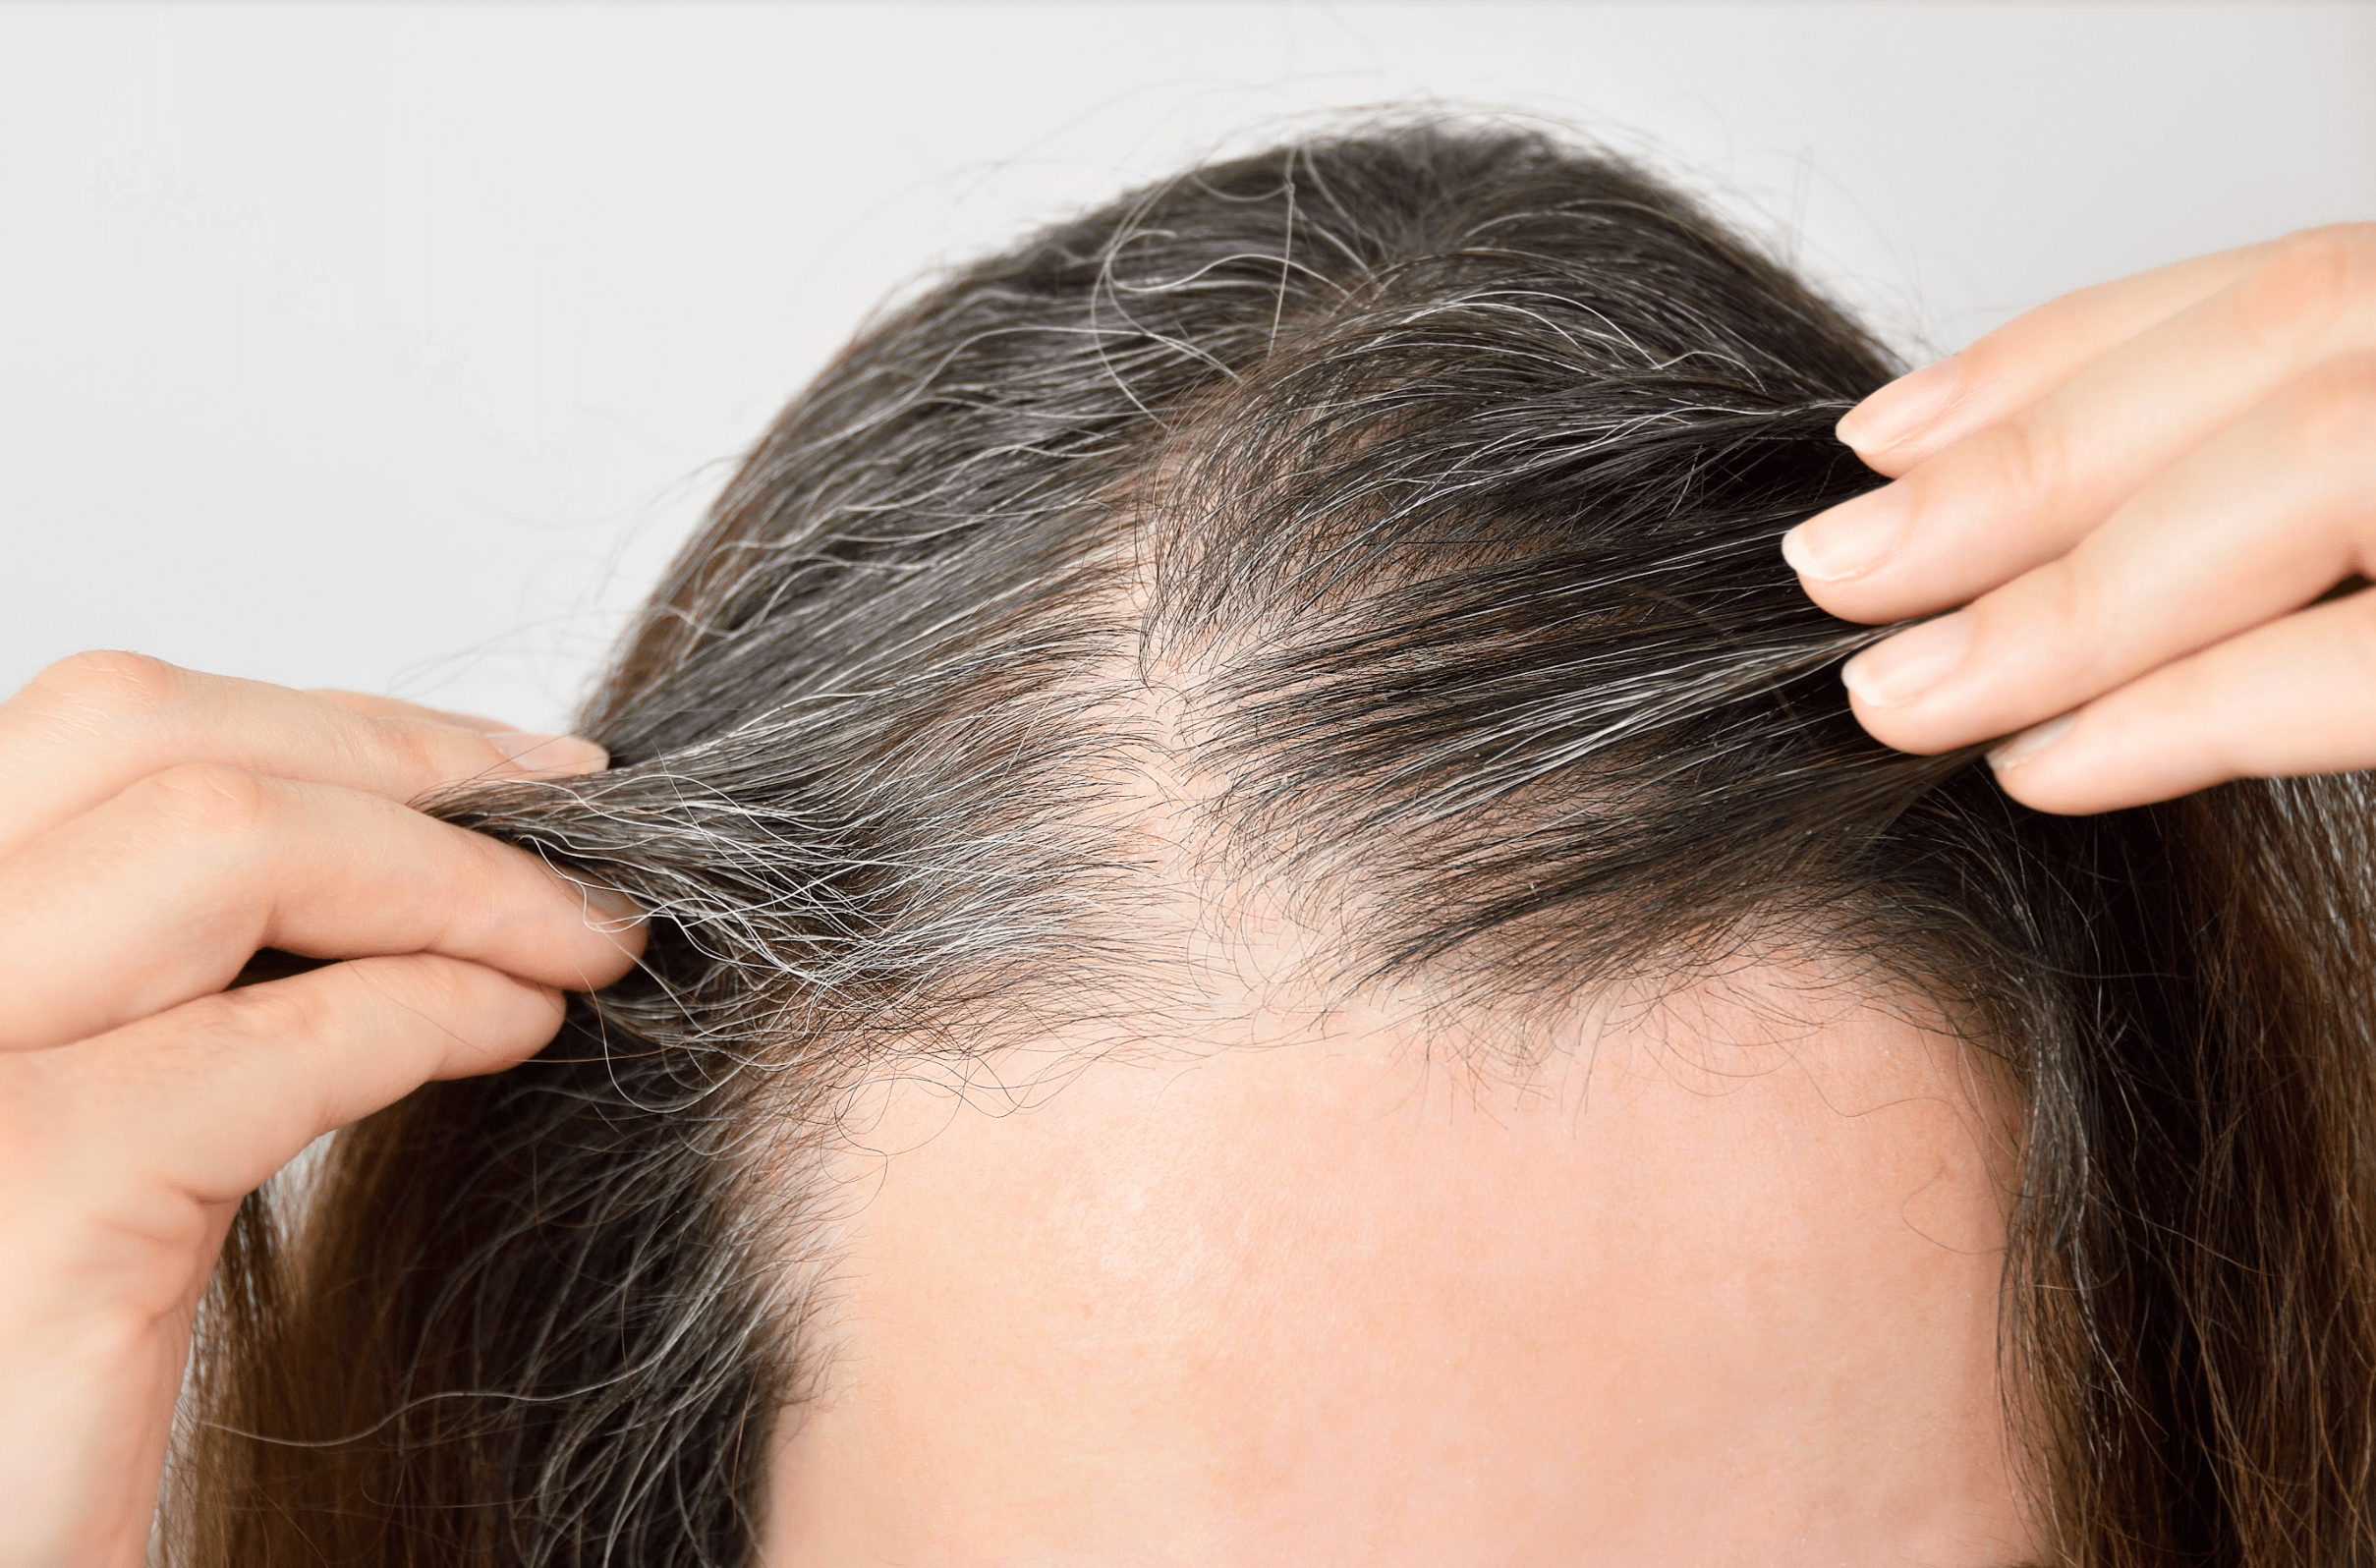 When Does Hair Grow Back After a Hair Transplant?